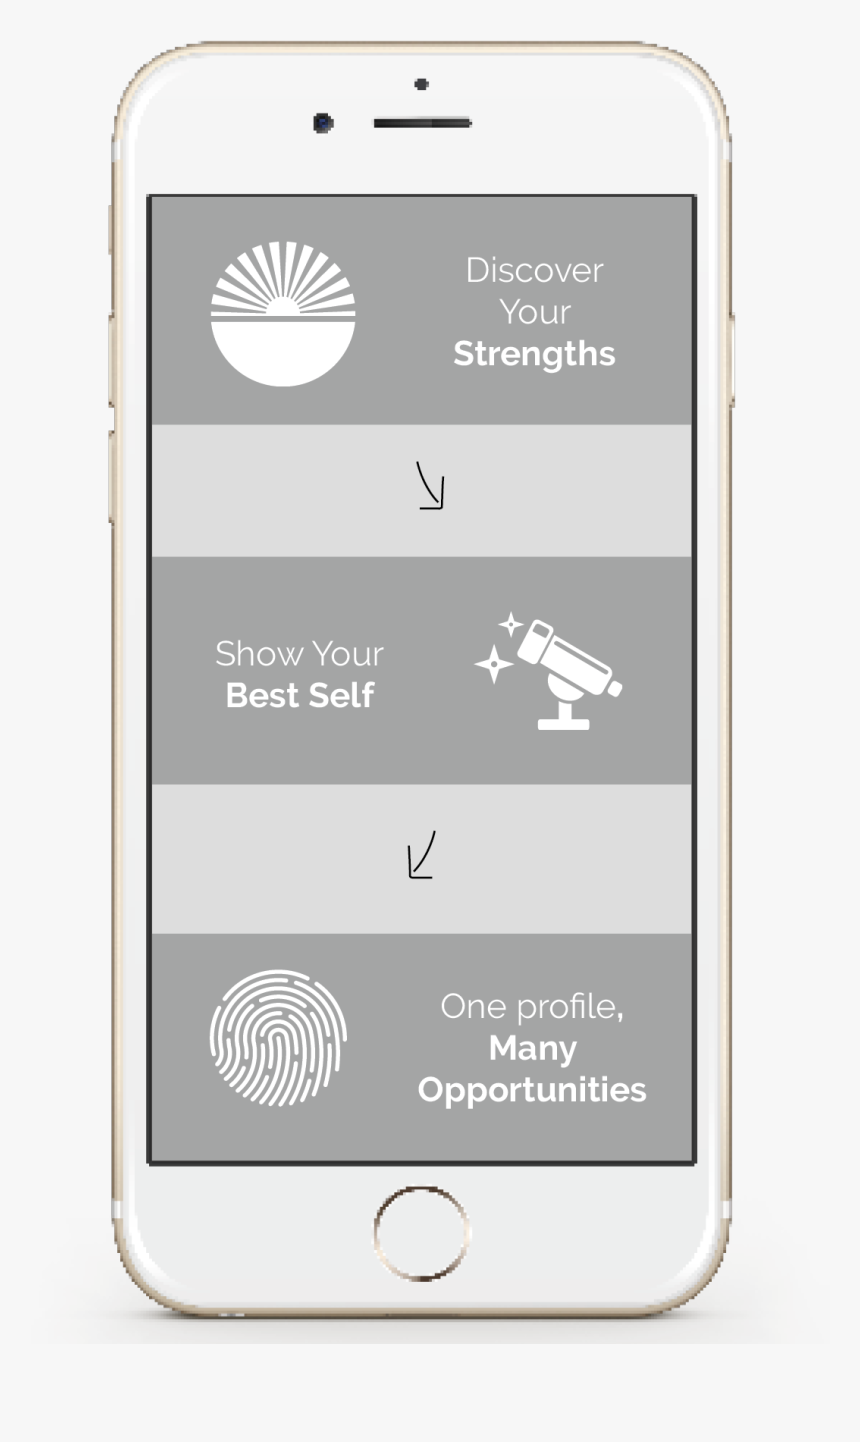 Strengths Png, Transparent Png, Free Download